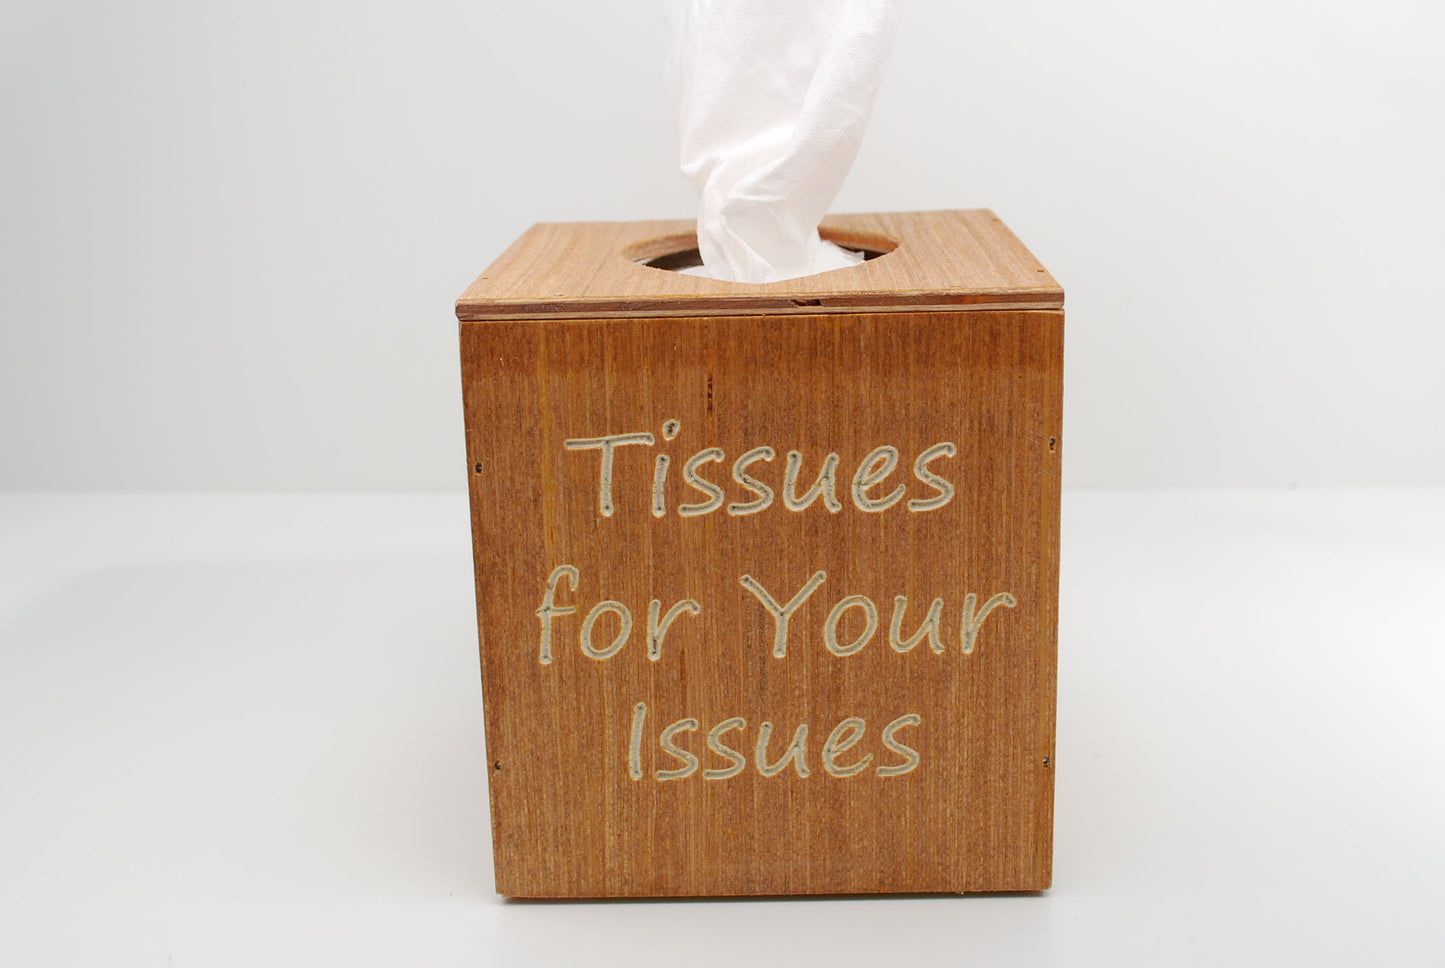 Tissues for Your Issues Wood Tissue Box Cover